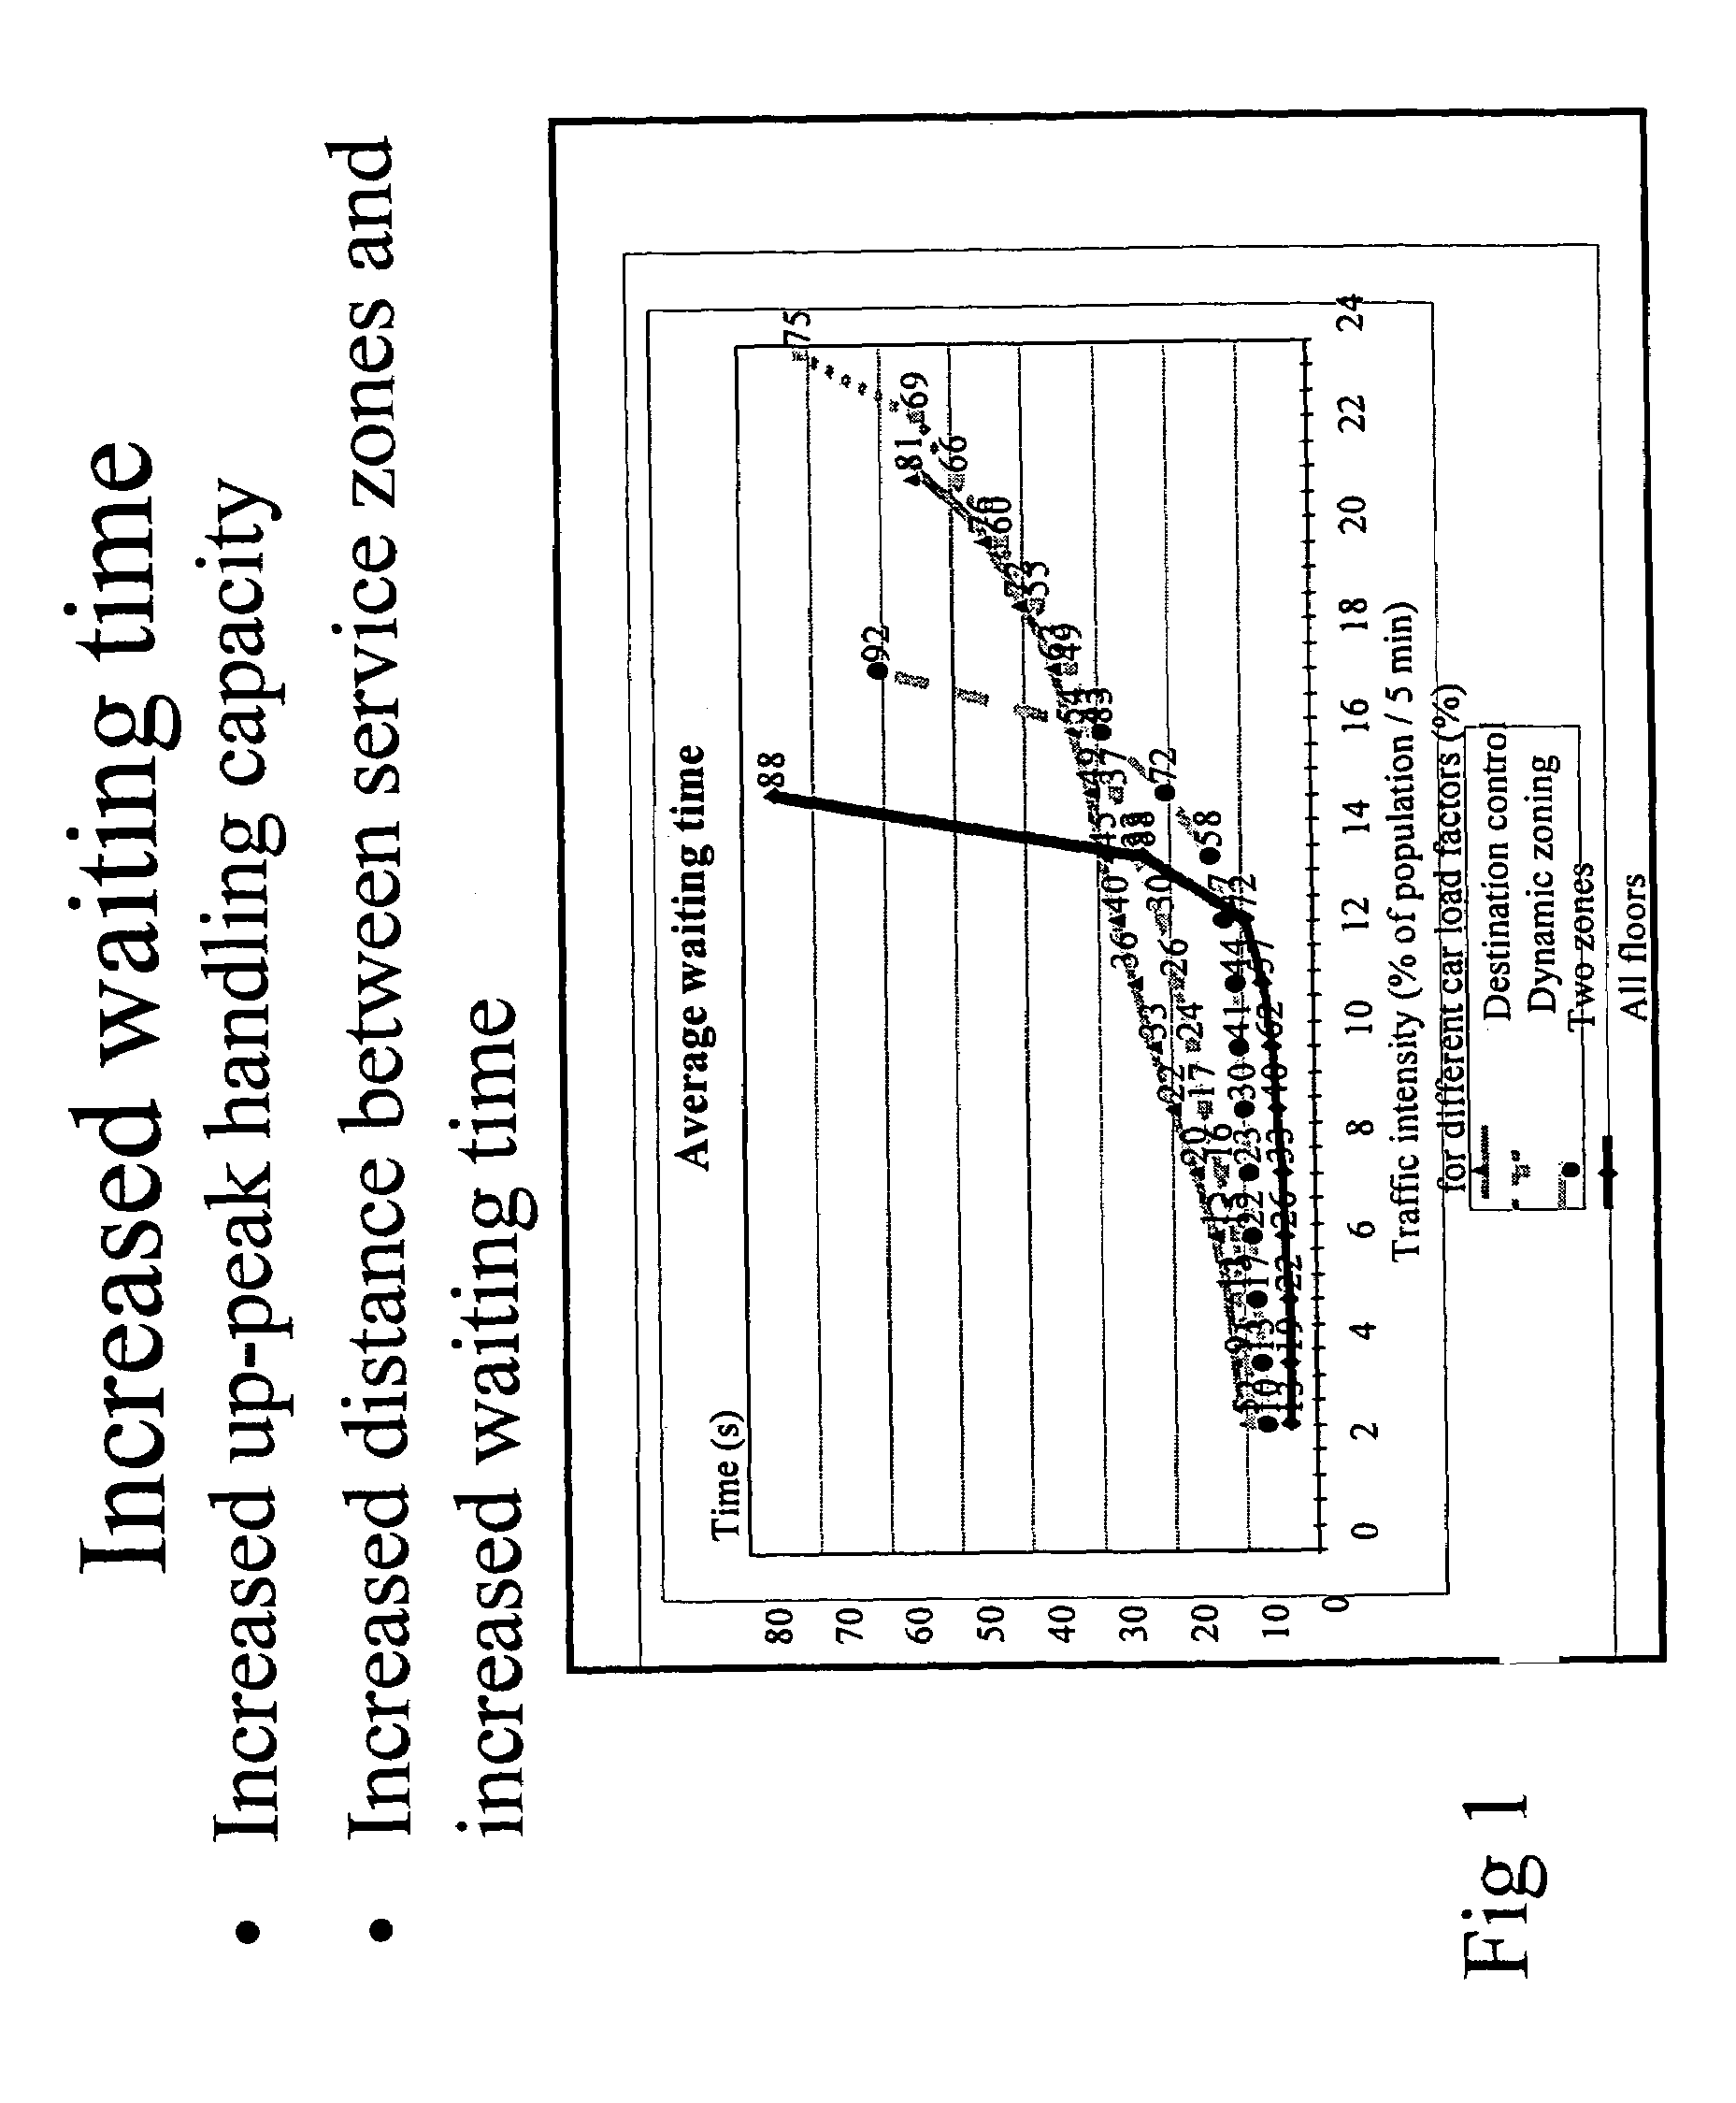 Method for controlling the elevators in an elevator bank in a building divided into zones